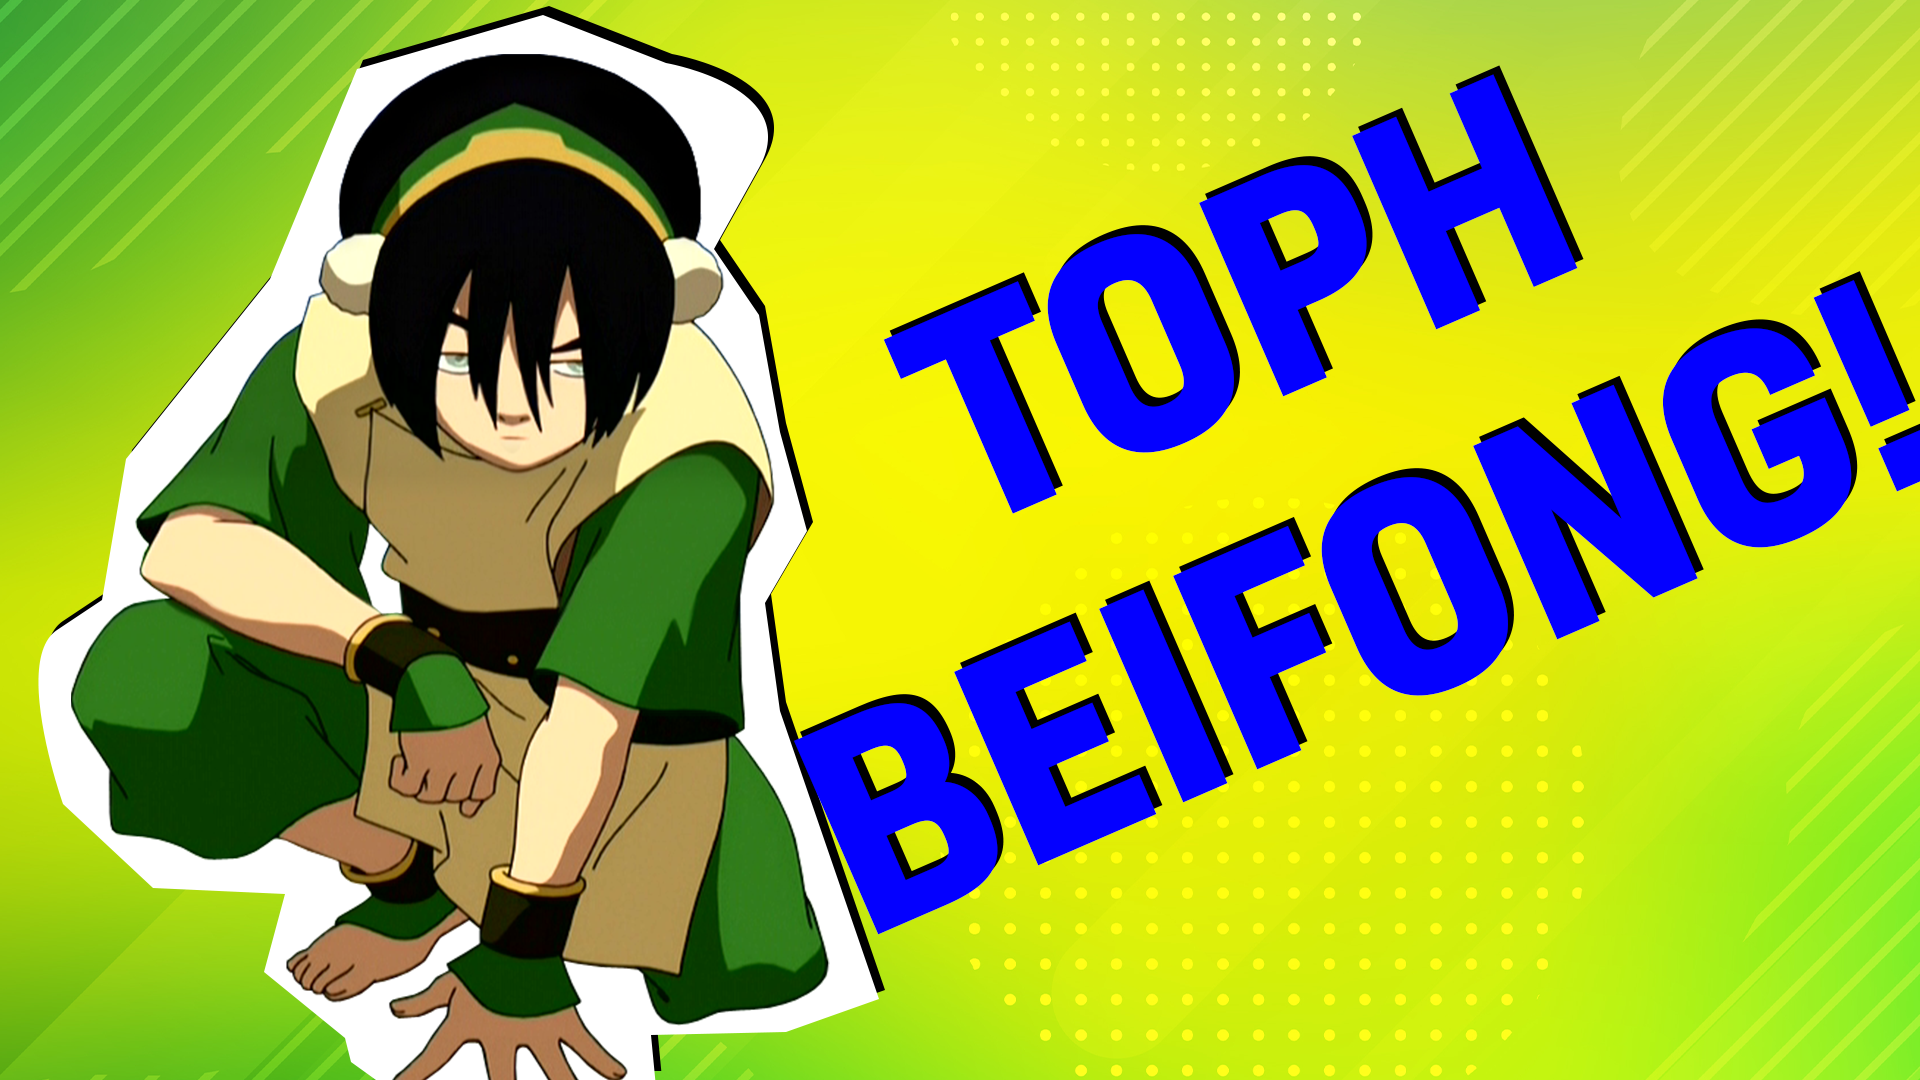 Toph Beifong result